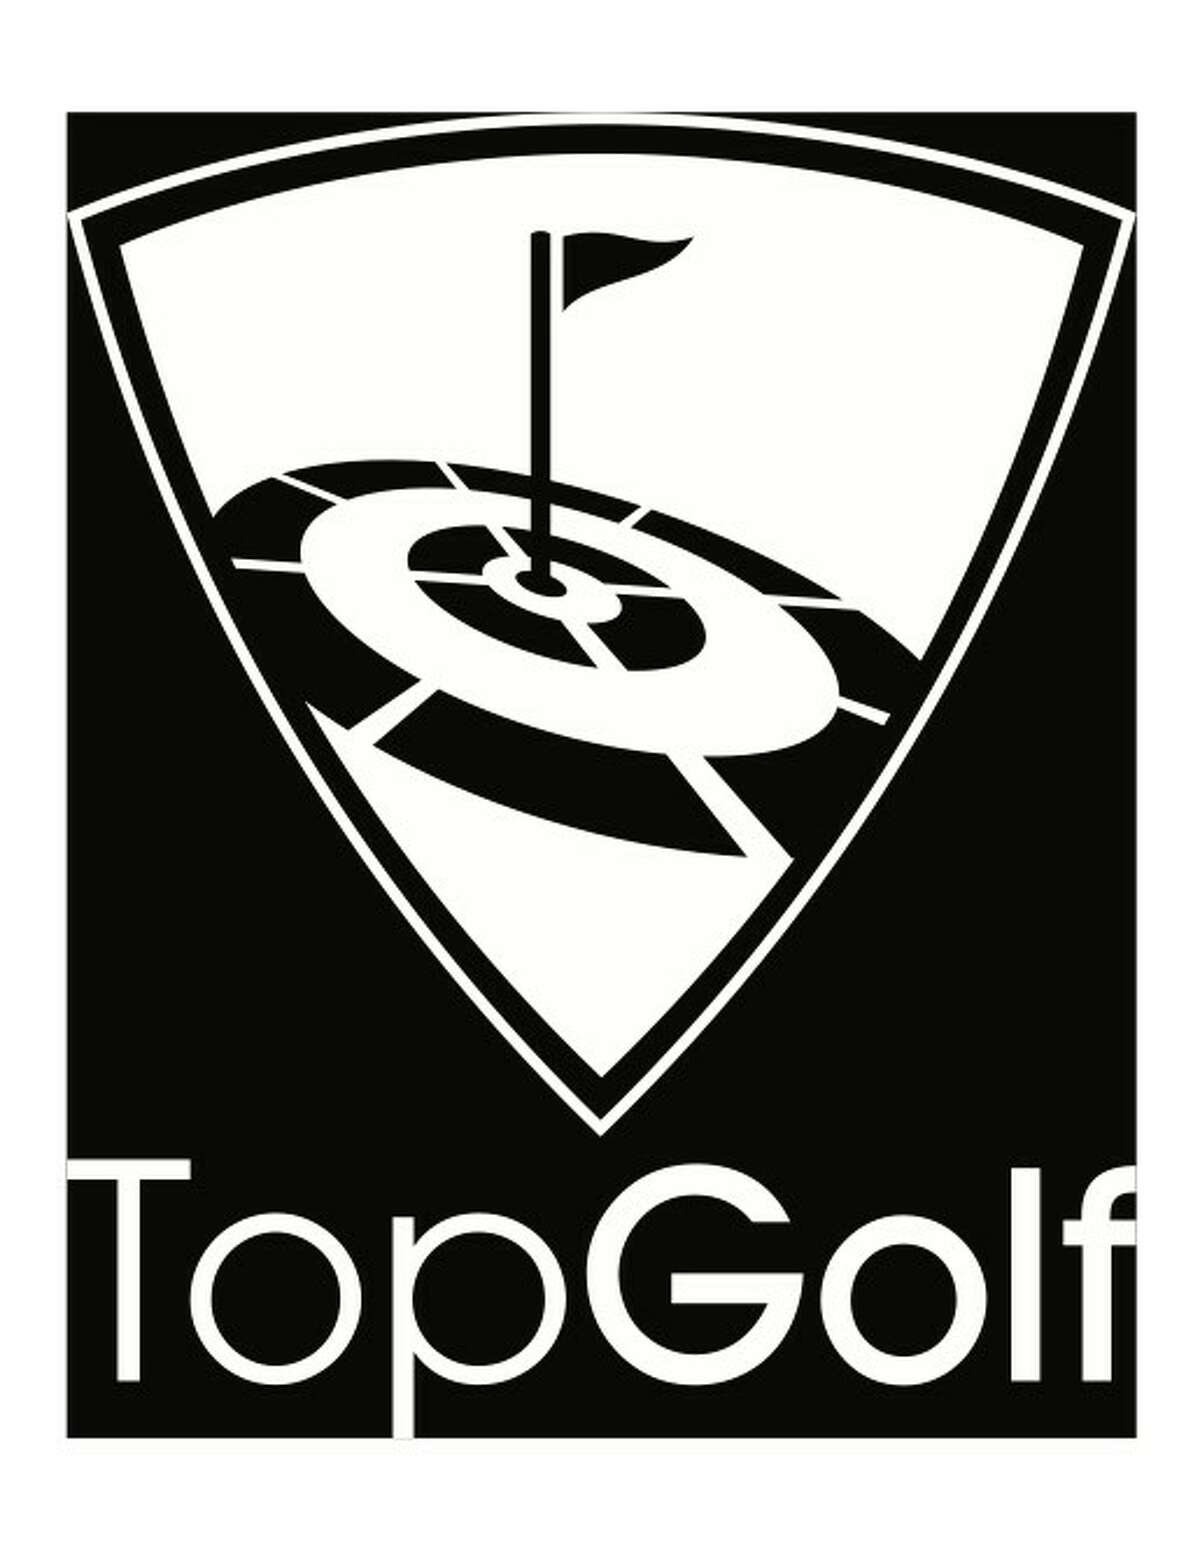 TopGolf announces plans for new facility located in Spring